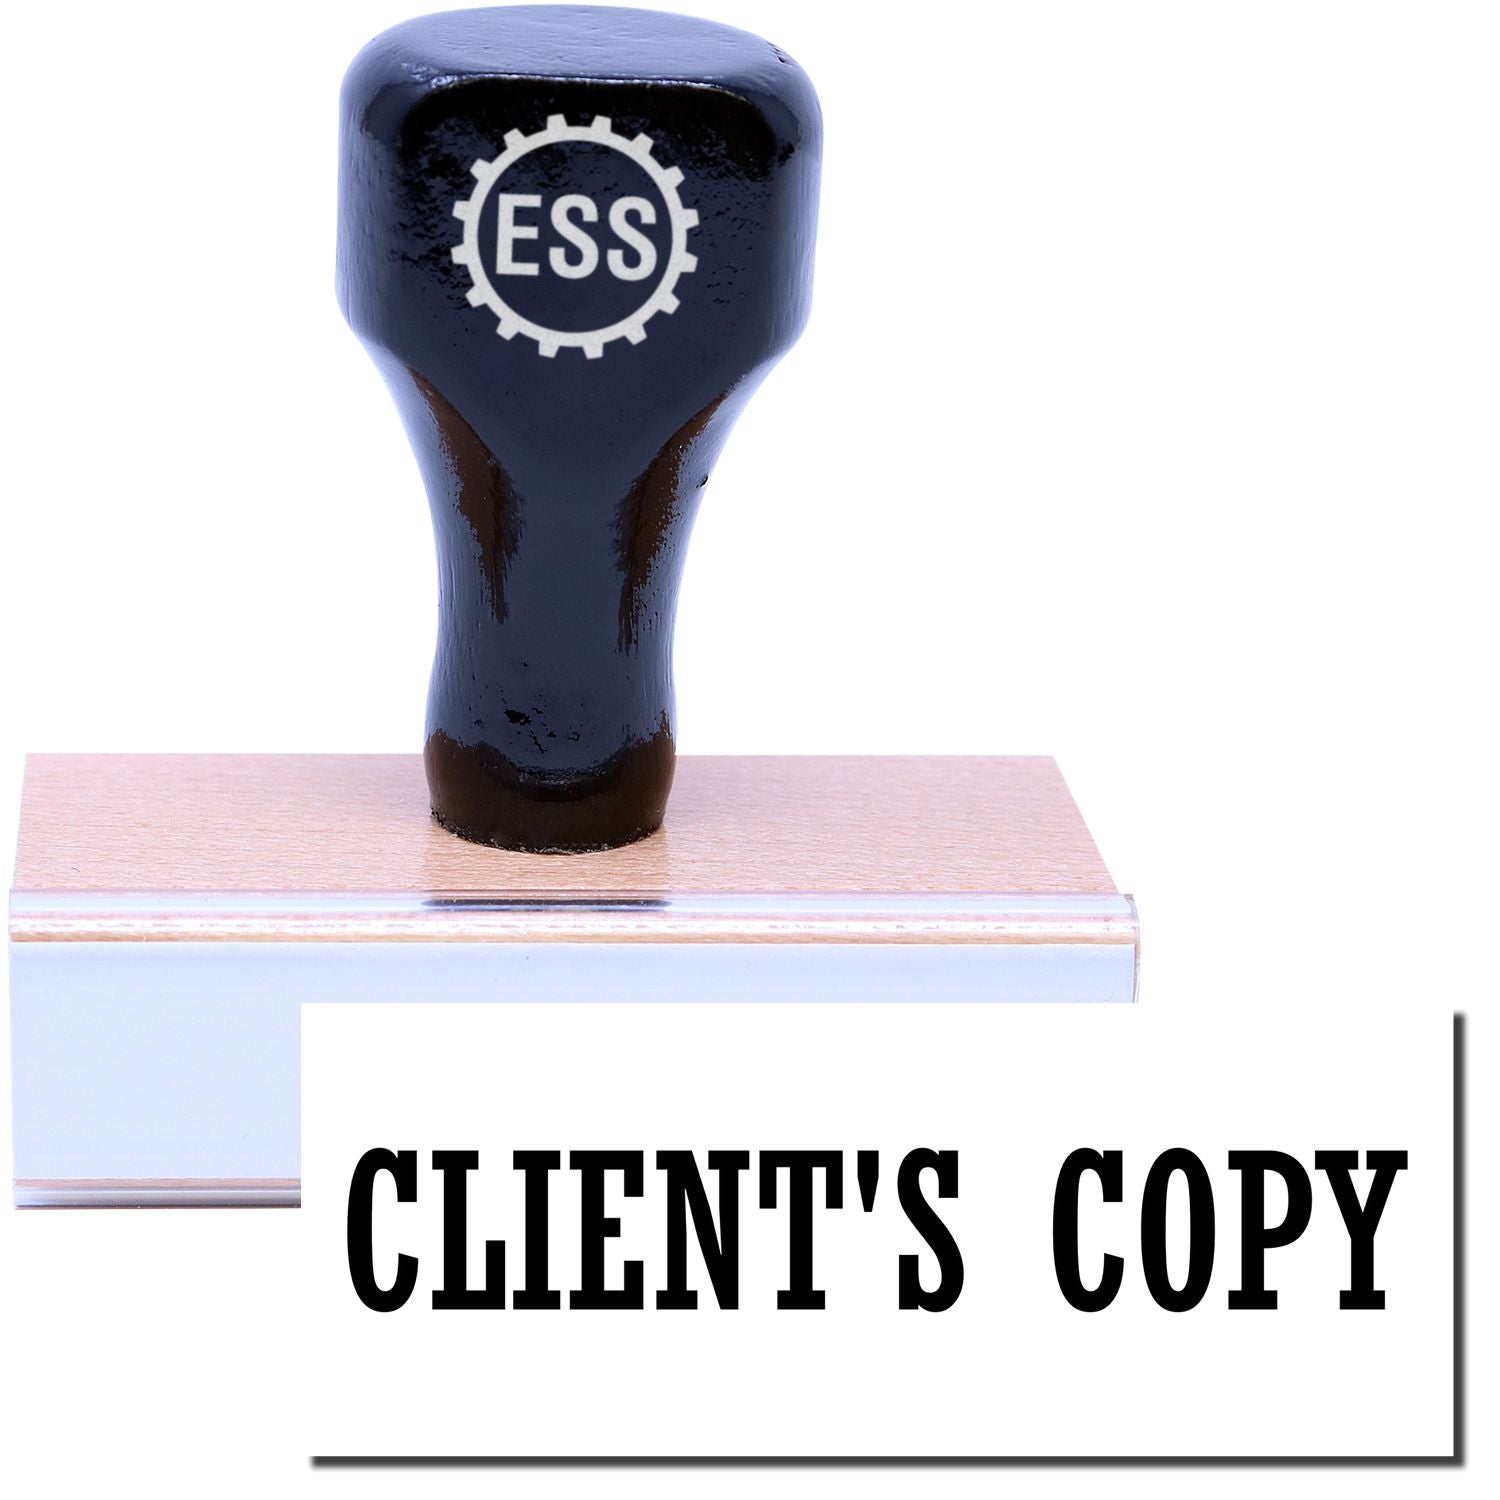 A stock office rubber stamp with a stamped image showing how the text "CLIENT'S COPY" is displayed after stamping.